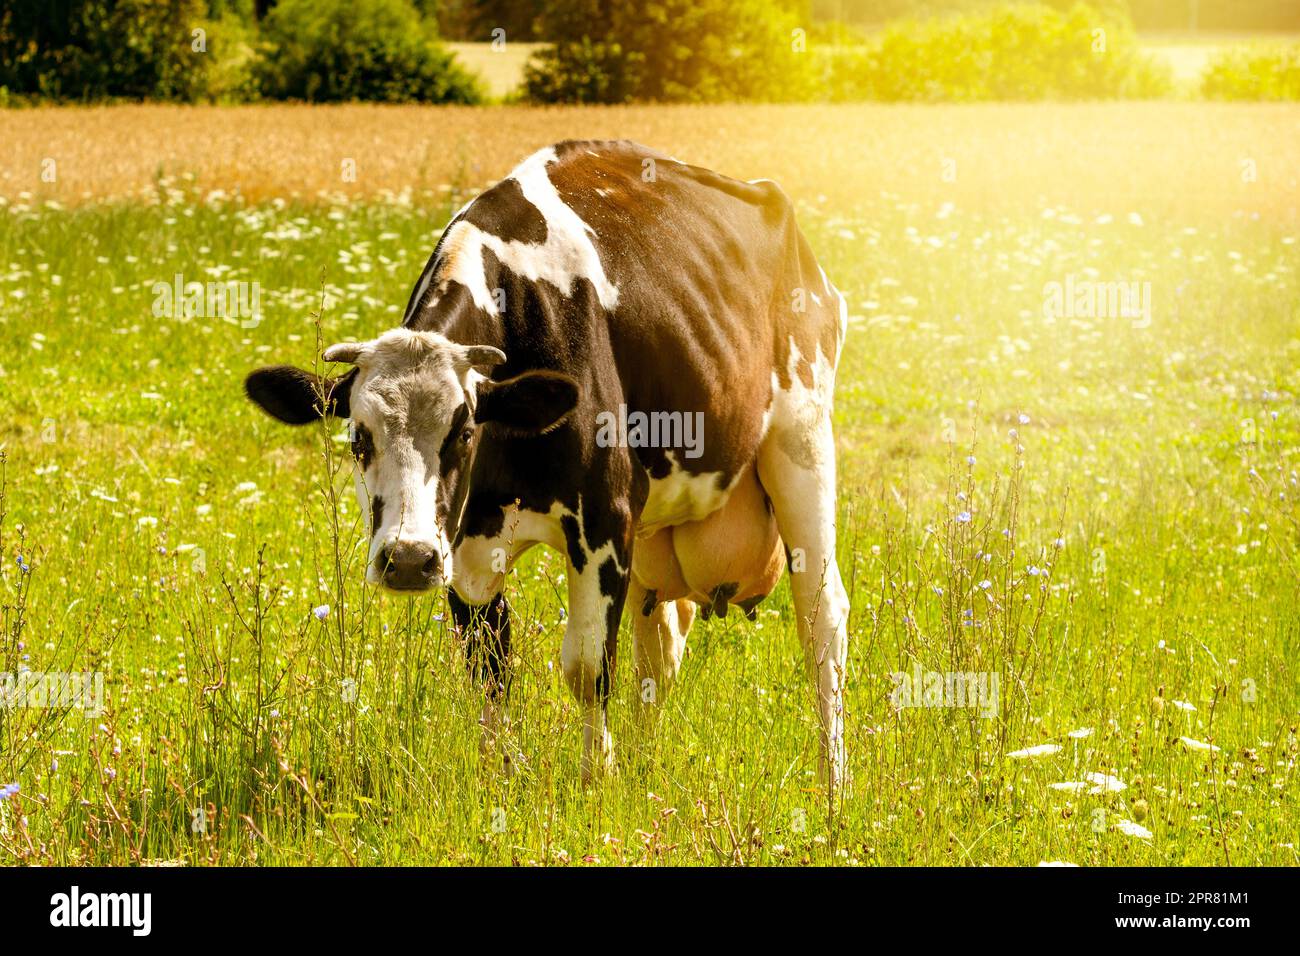 Cow in the field on free range Stock Photo